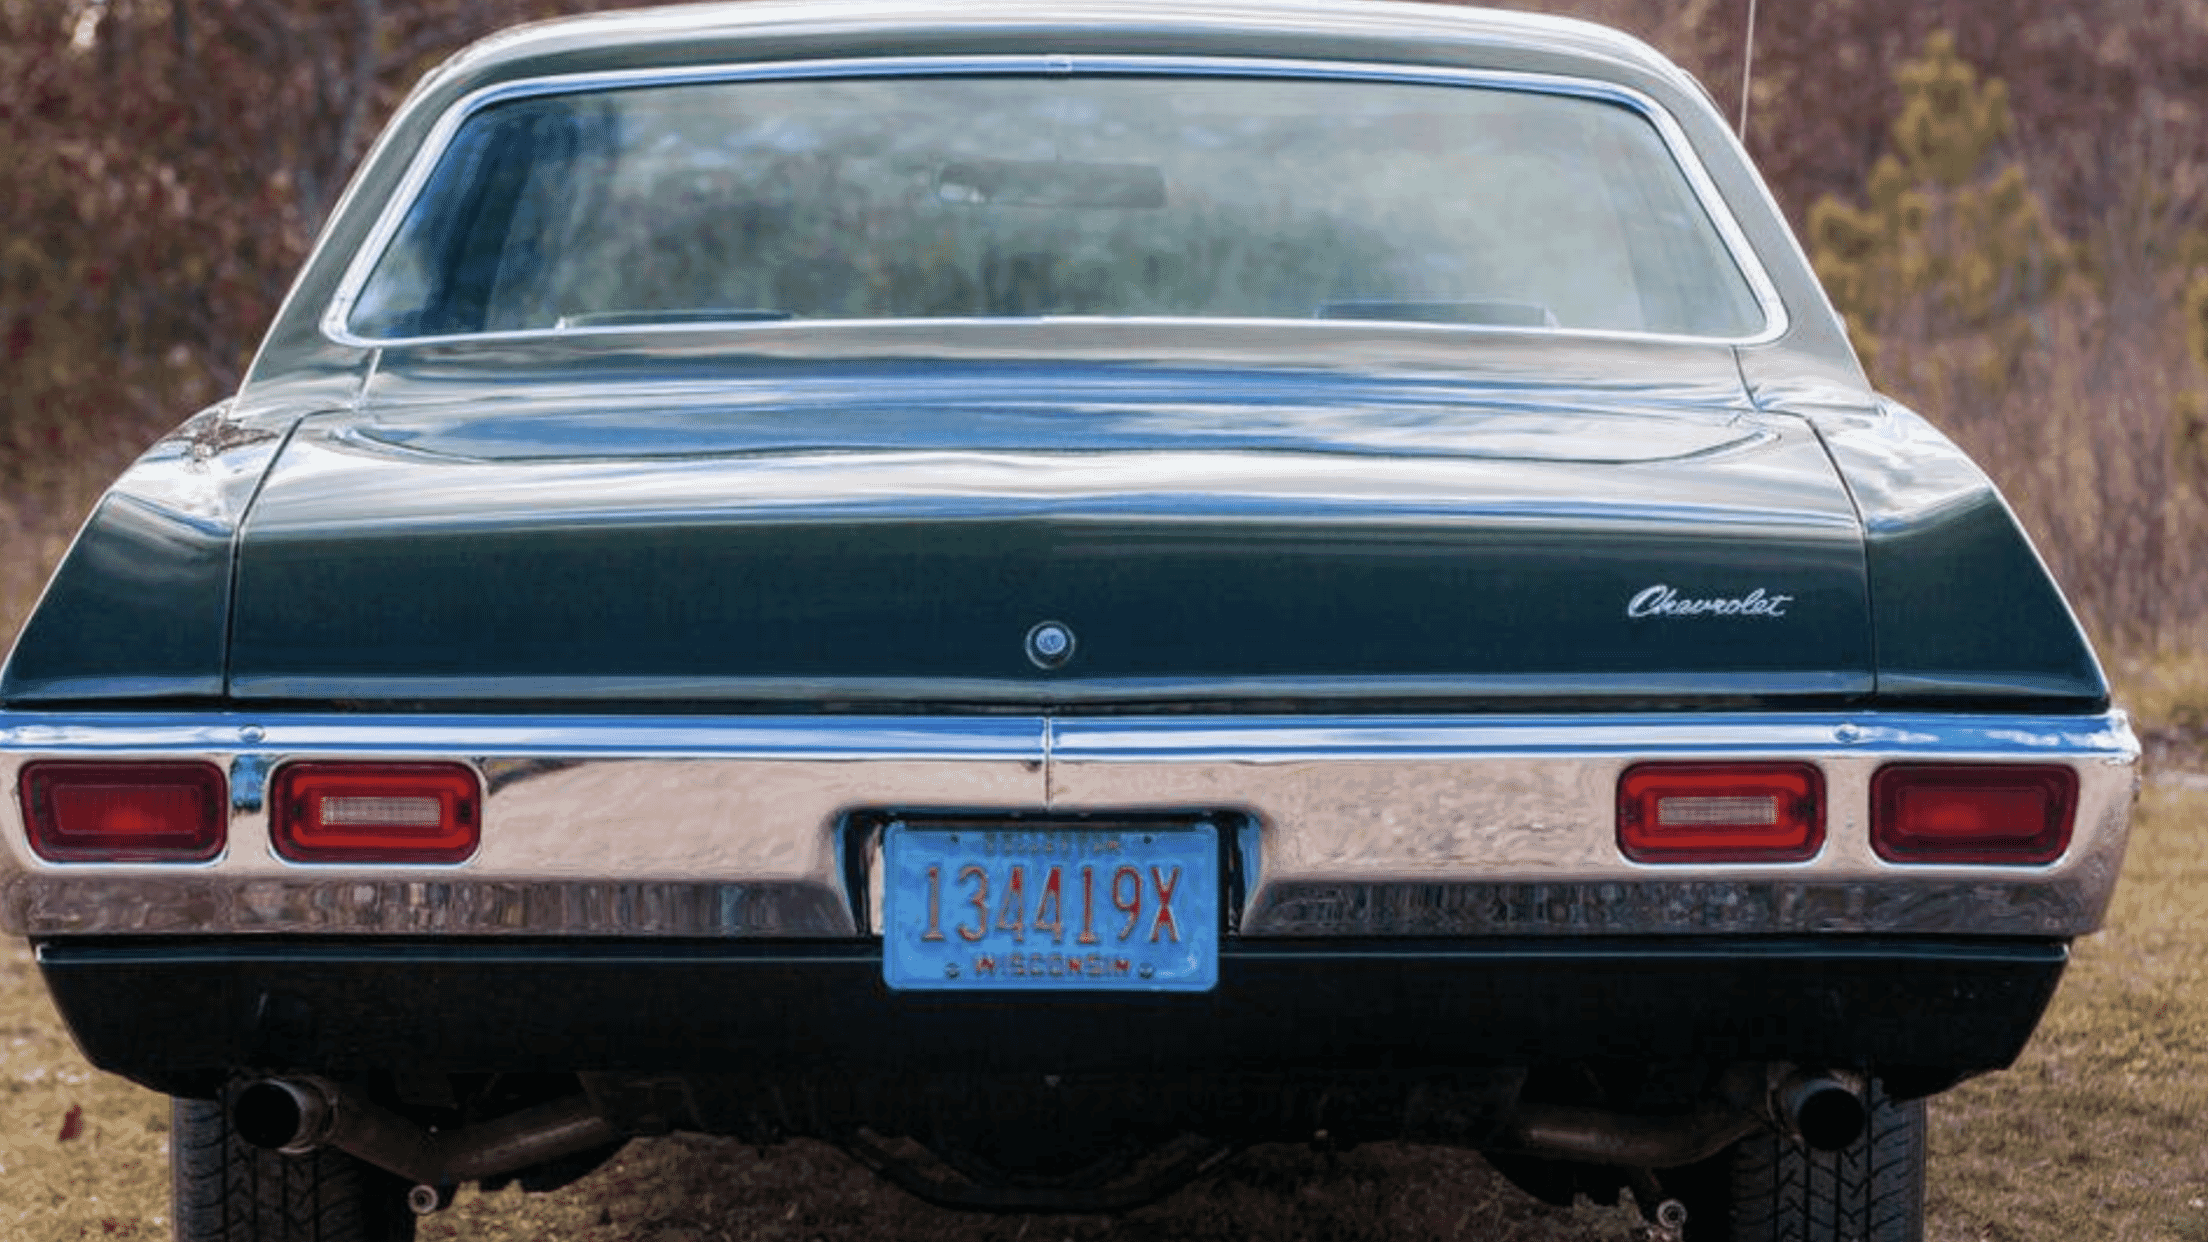 Rear view of a green 1969 Chevrolet Biscayne two door hardtop with a Wisconsin license plate